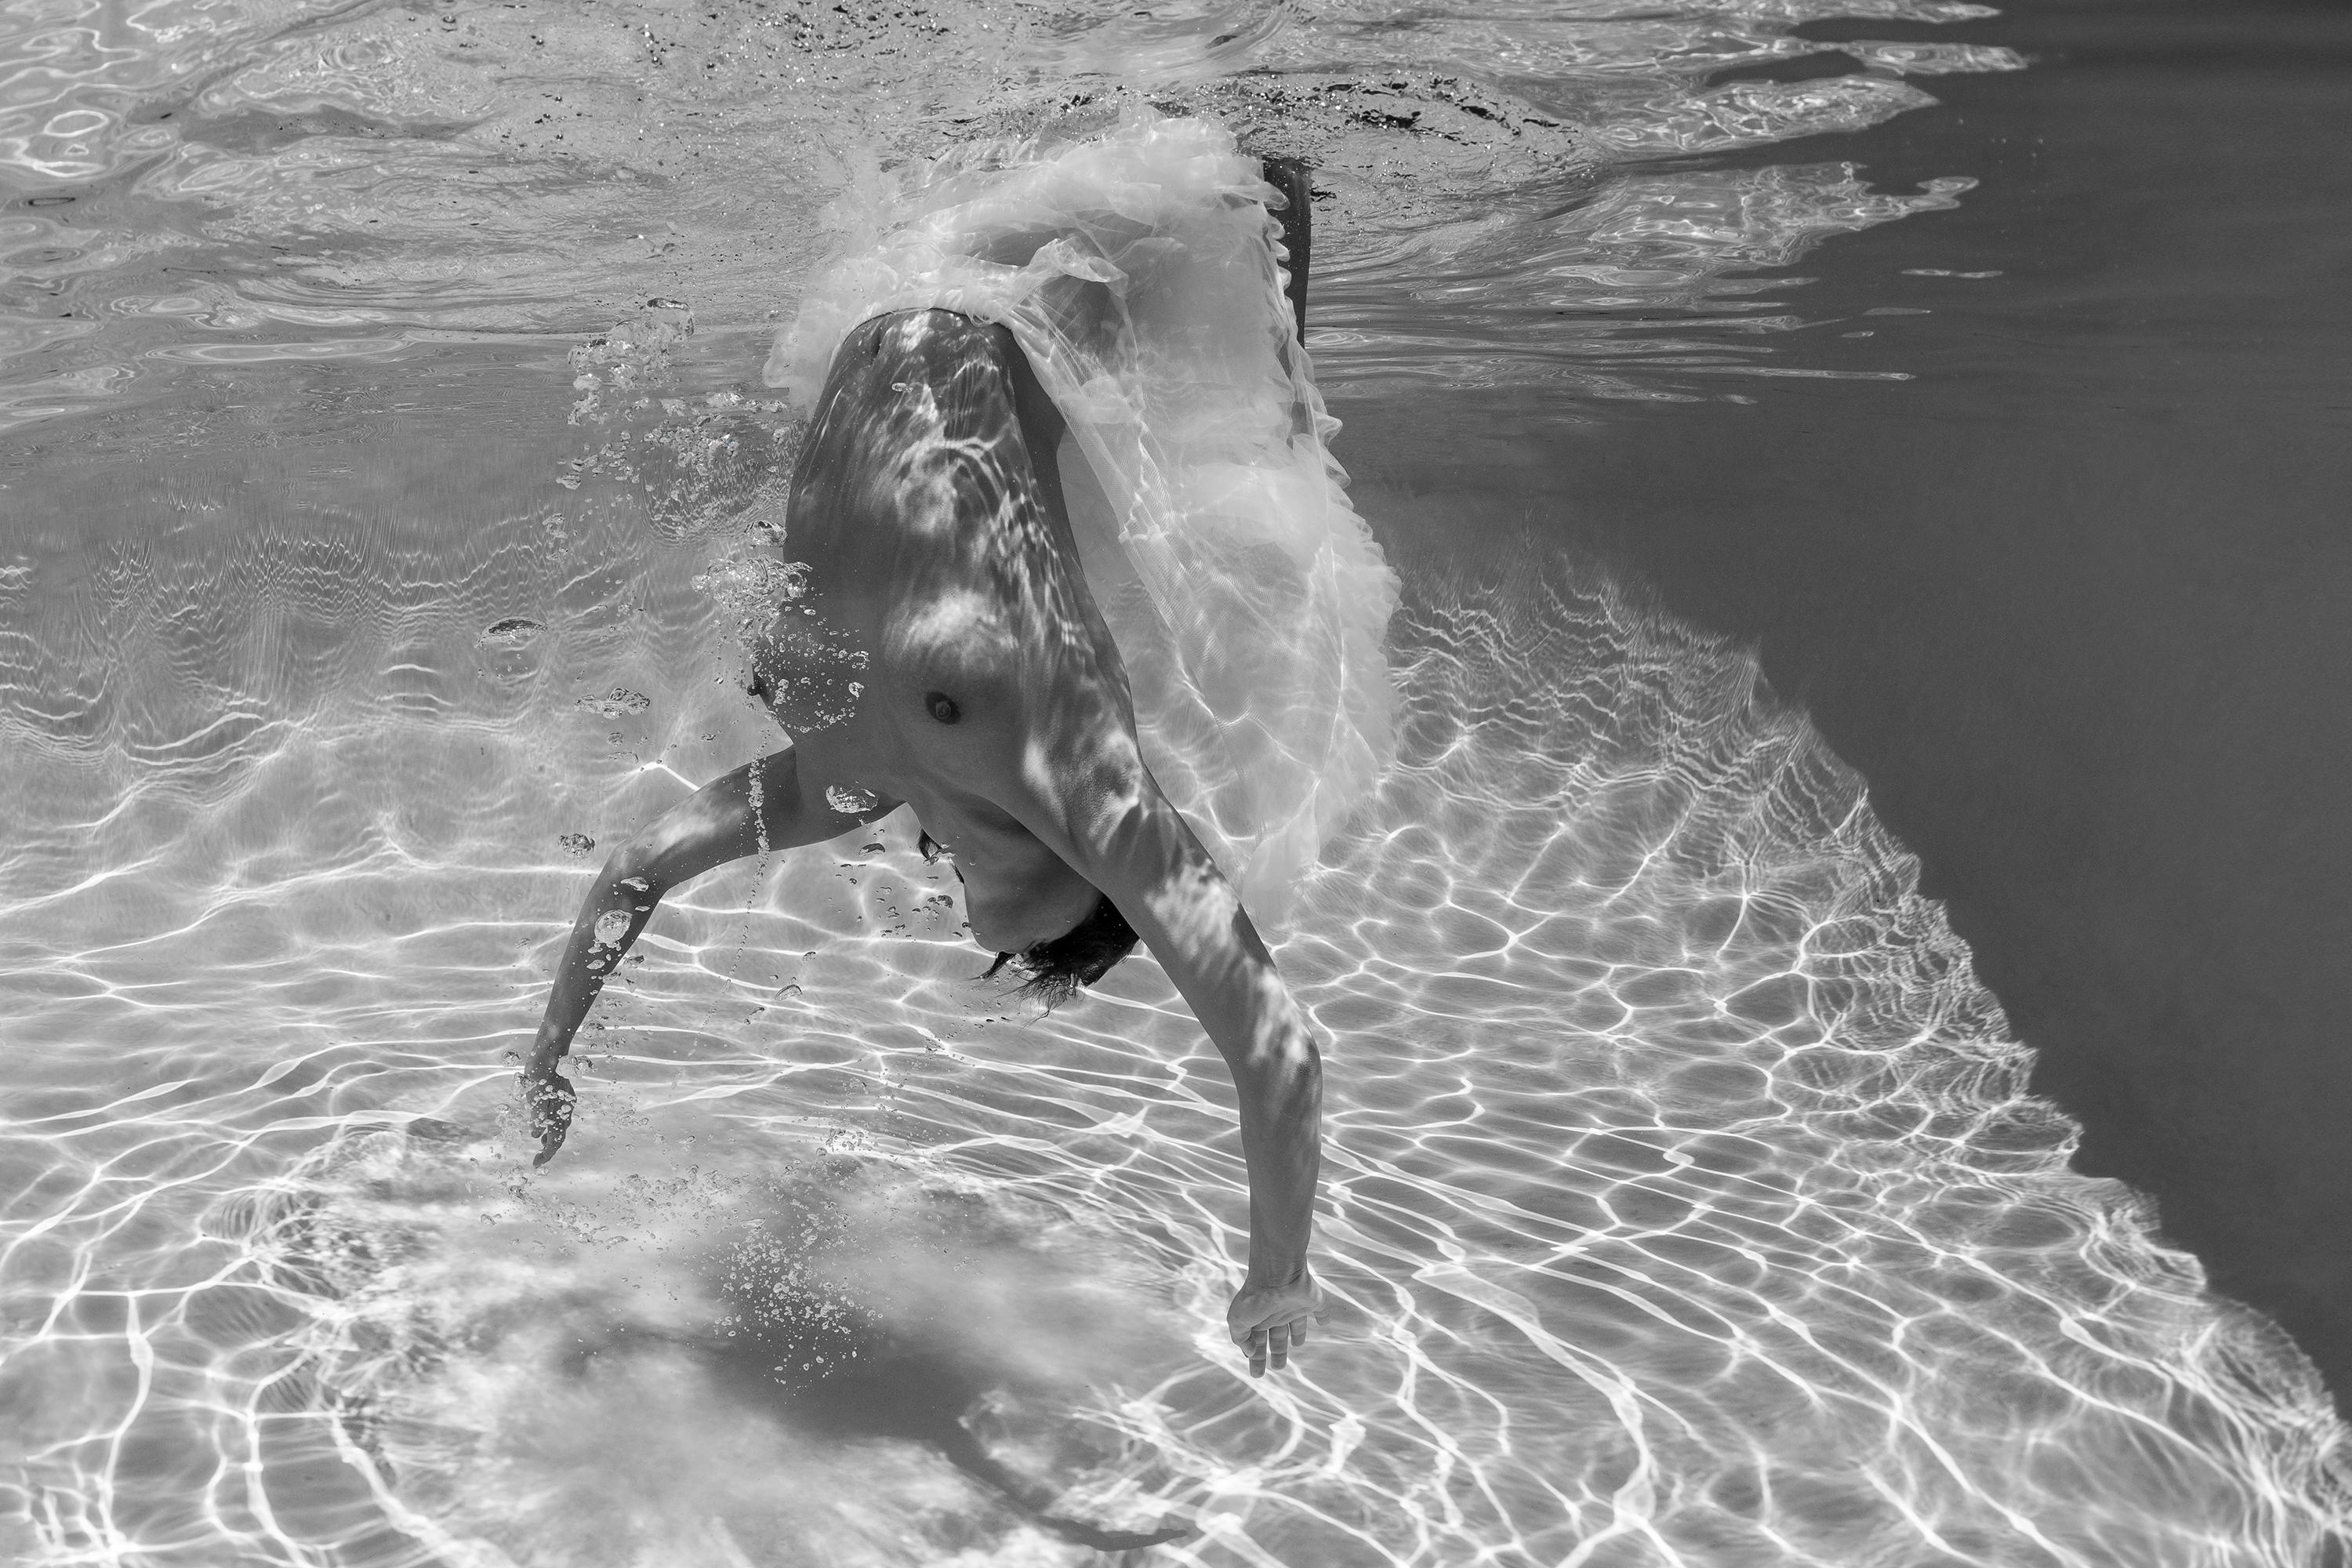 Alex Sher Nude Photograph - Shapes and Shadows - underwater nude b&w photograph - archival pigment 43x64"